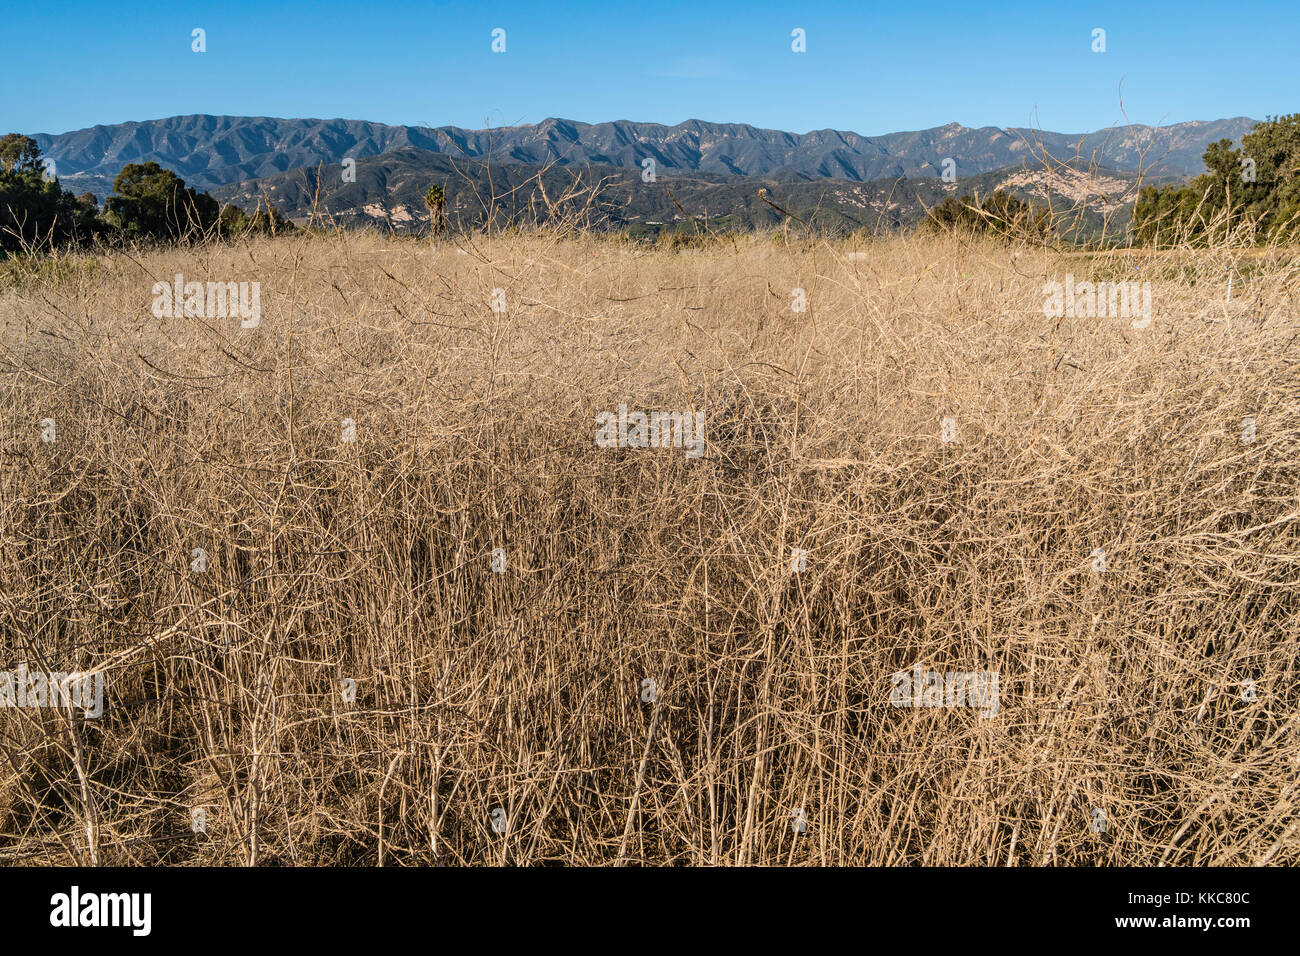 A field full of dried up fennel plants near the Pacific Ocean in Carpinteria, California Stock Photo